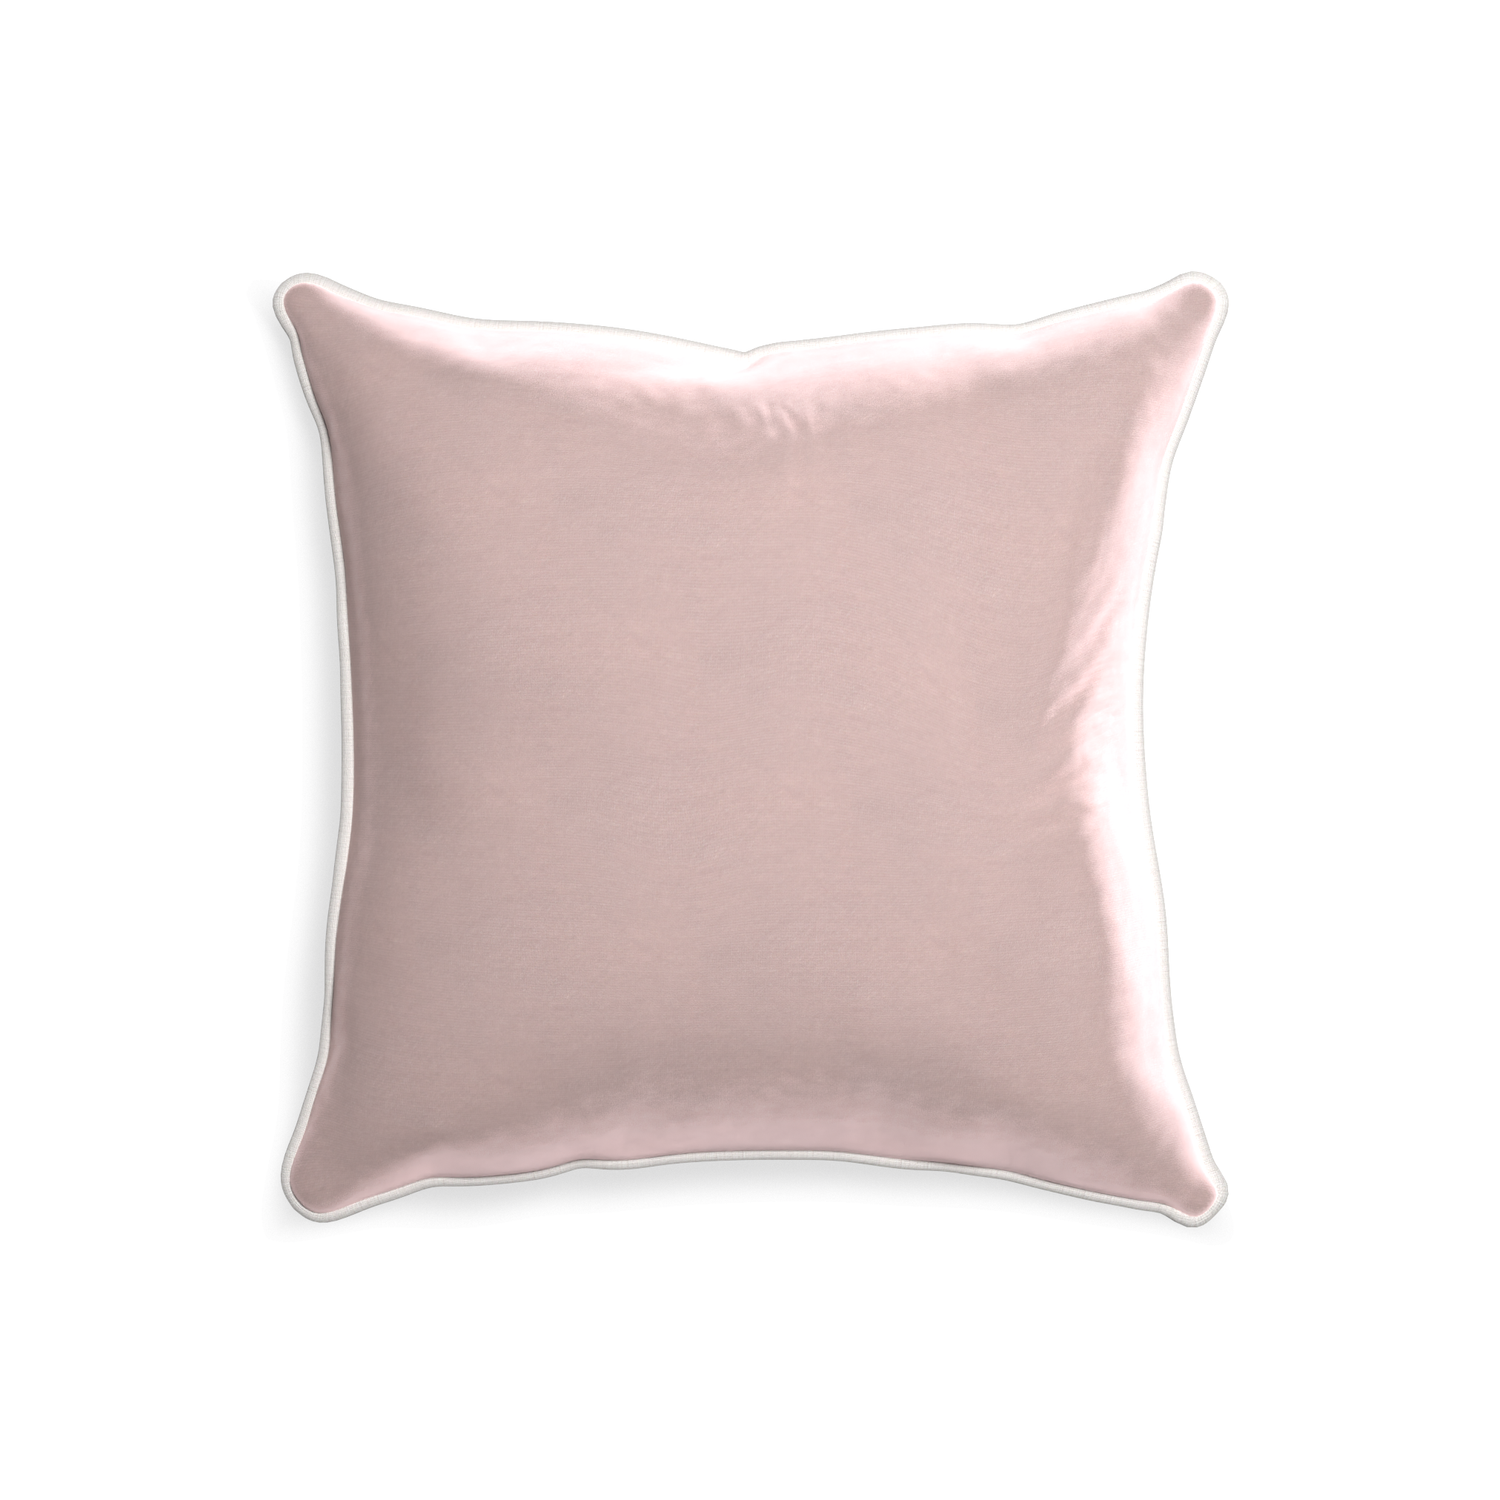 20-square rose velvet custom pillow with snow piping on white background